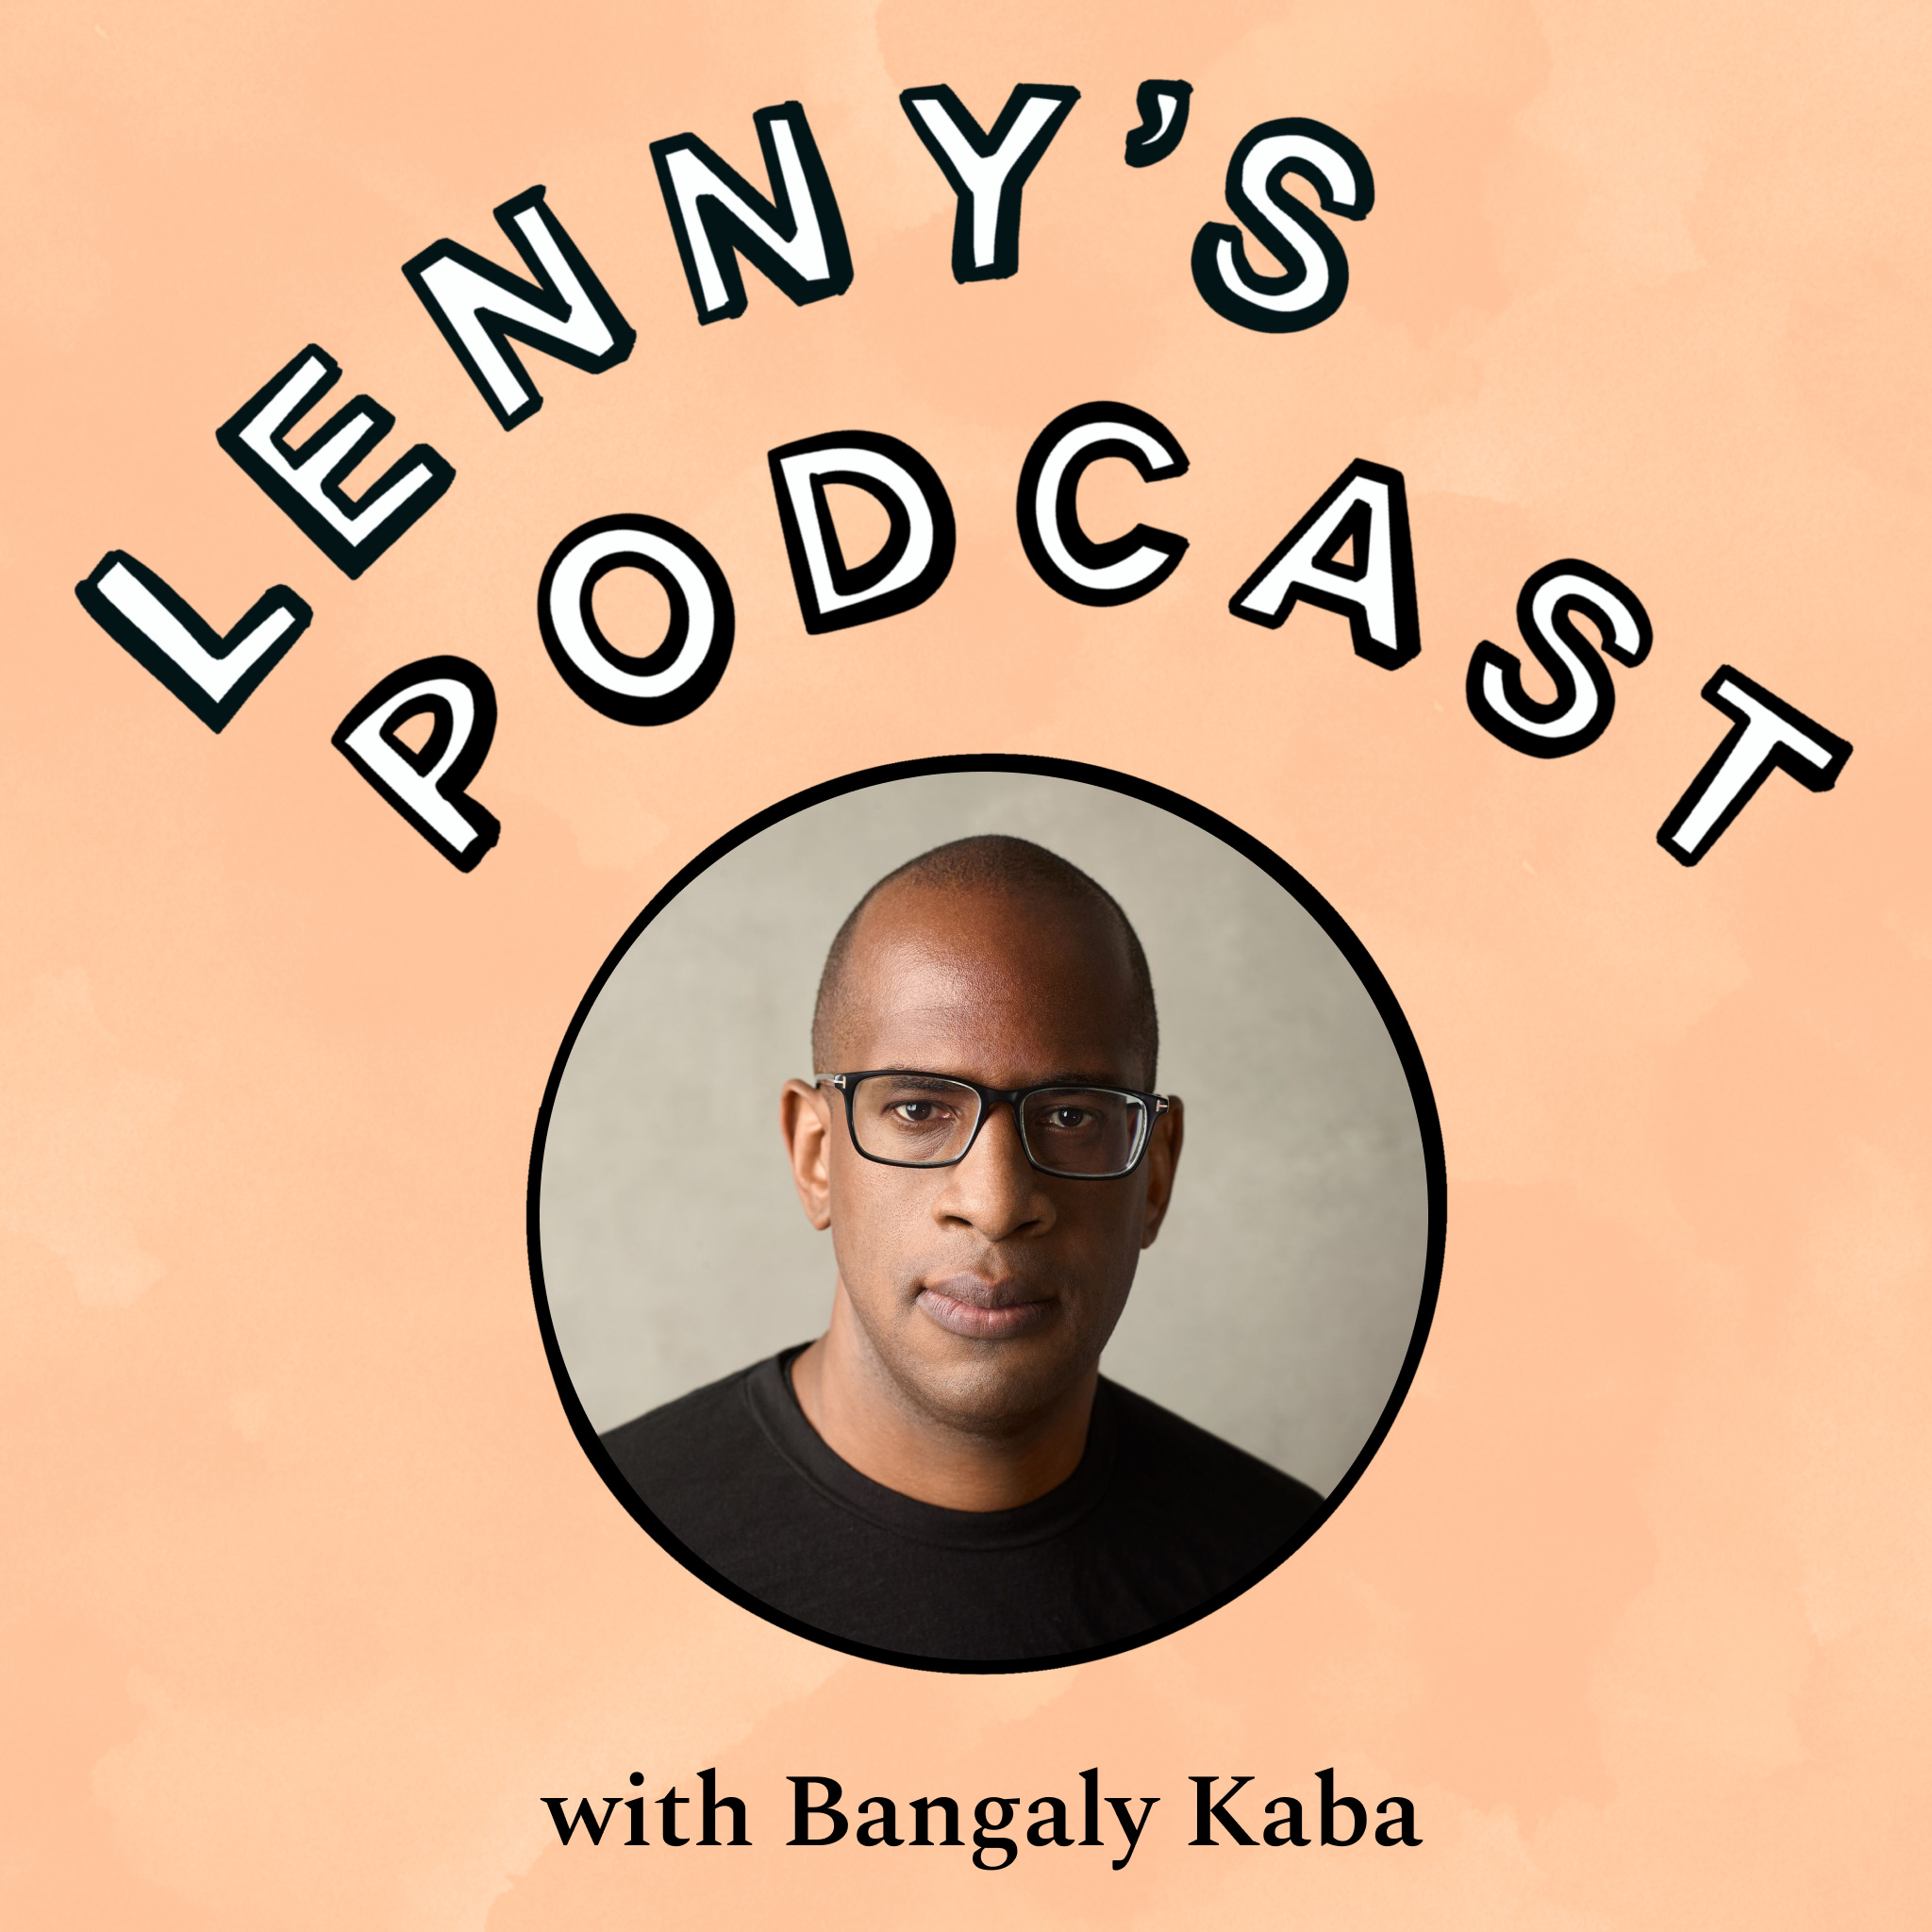 Unorthodox frameworks for growing your product, career, and impact | Bangaly Kaba (YouTube, Instagram, Facebook, Instacart)